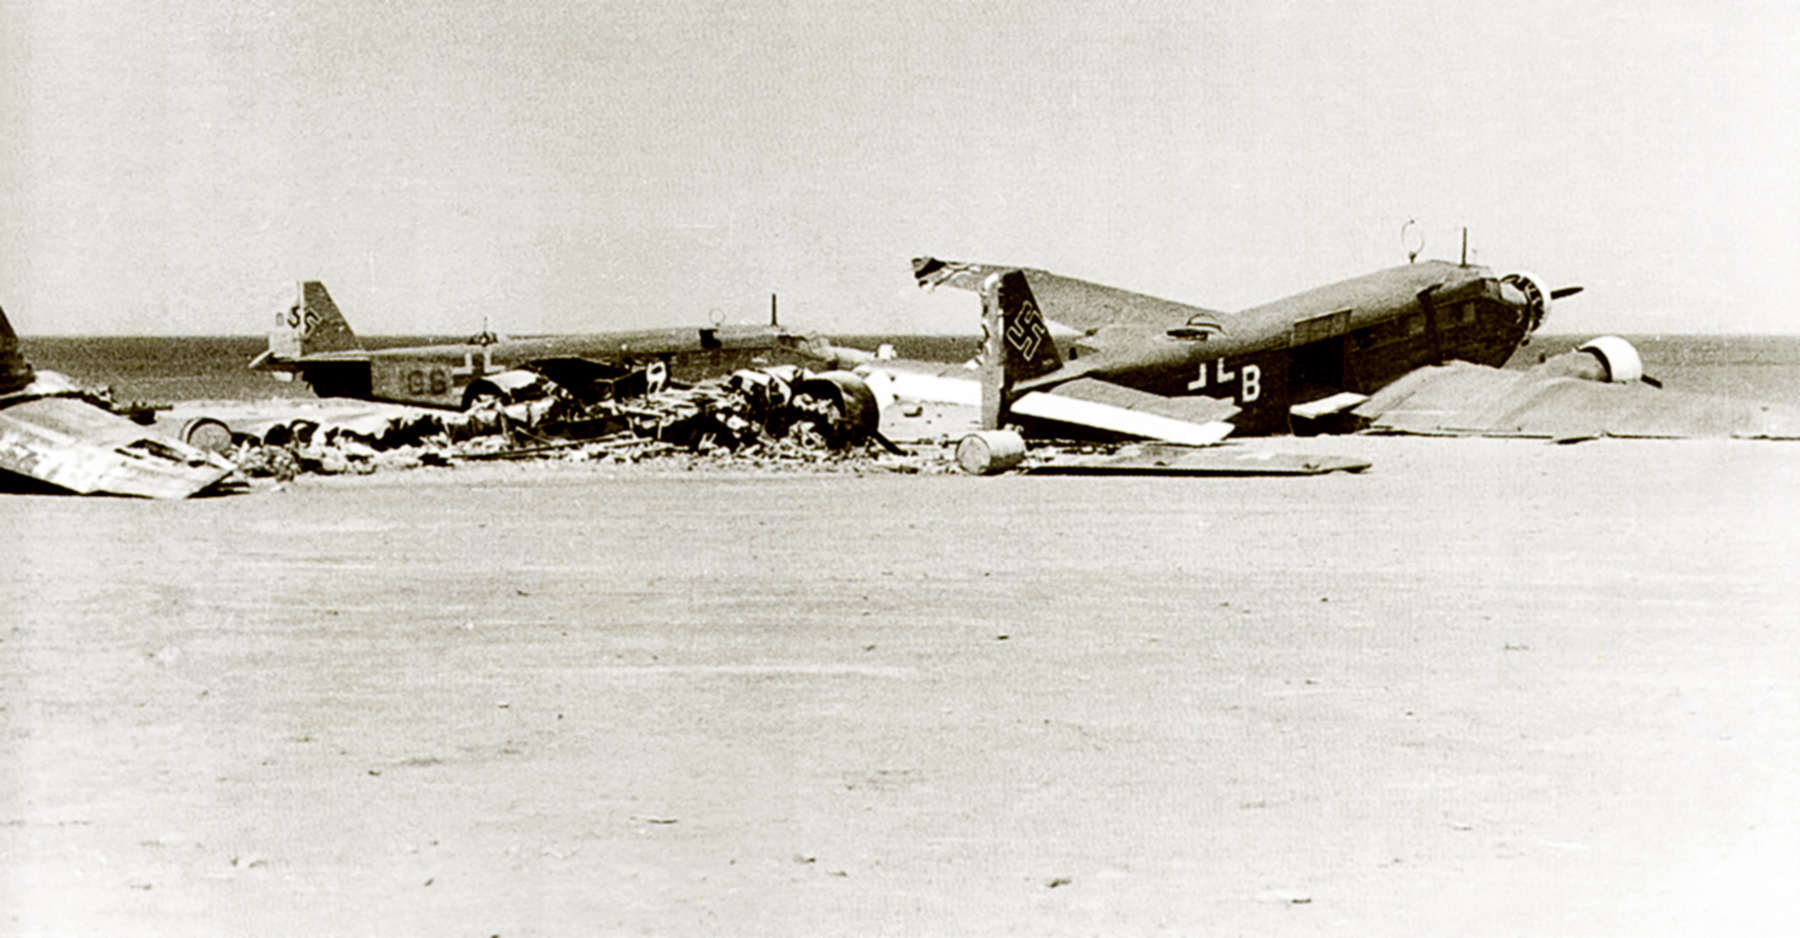 Maleme airfield Crete Junkers Ju 52 3mg4e wrecked on Maleme AF Crete 1941 03